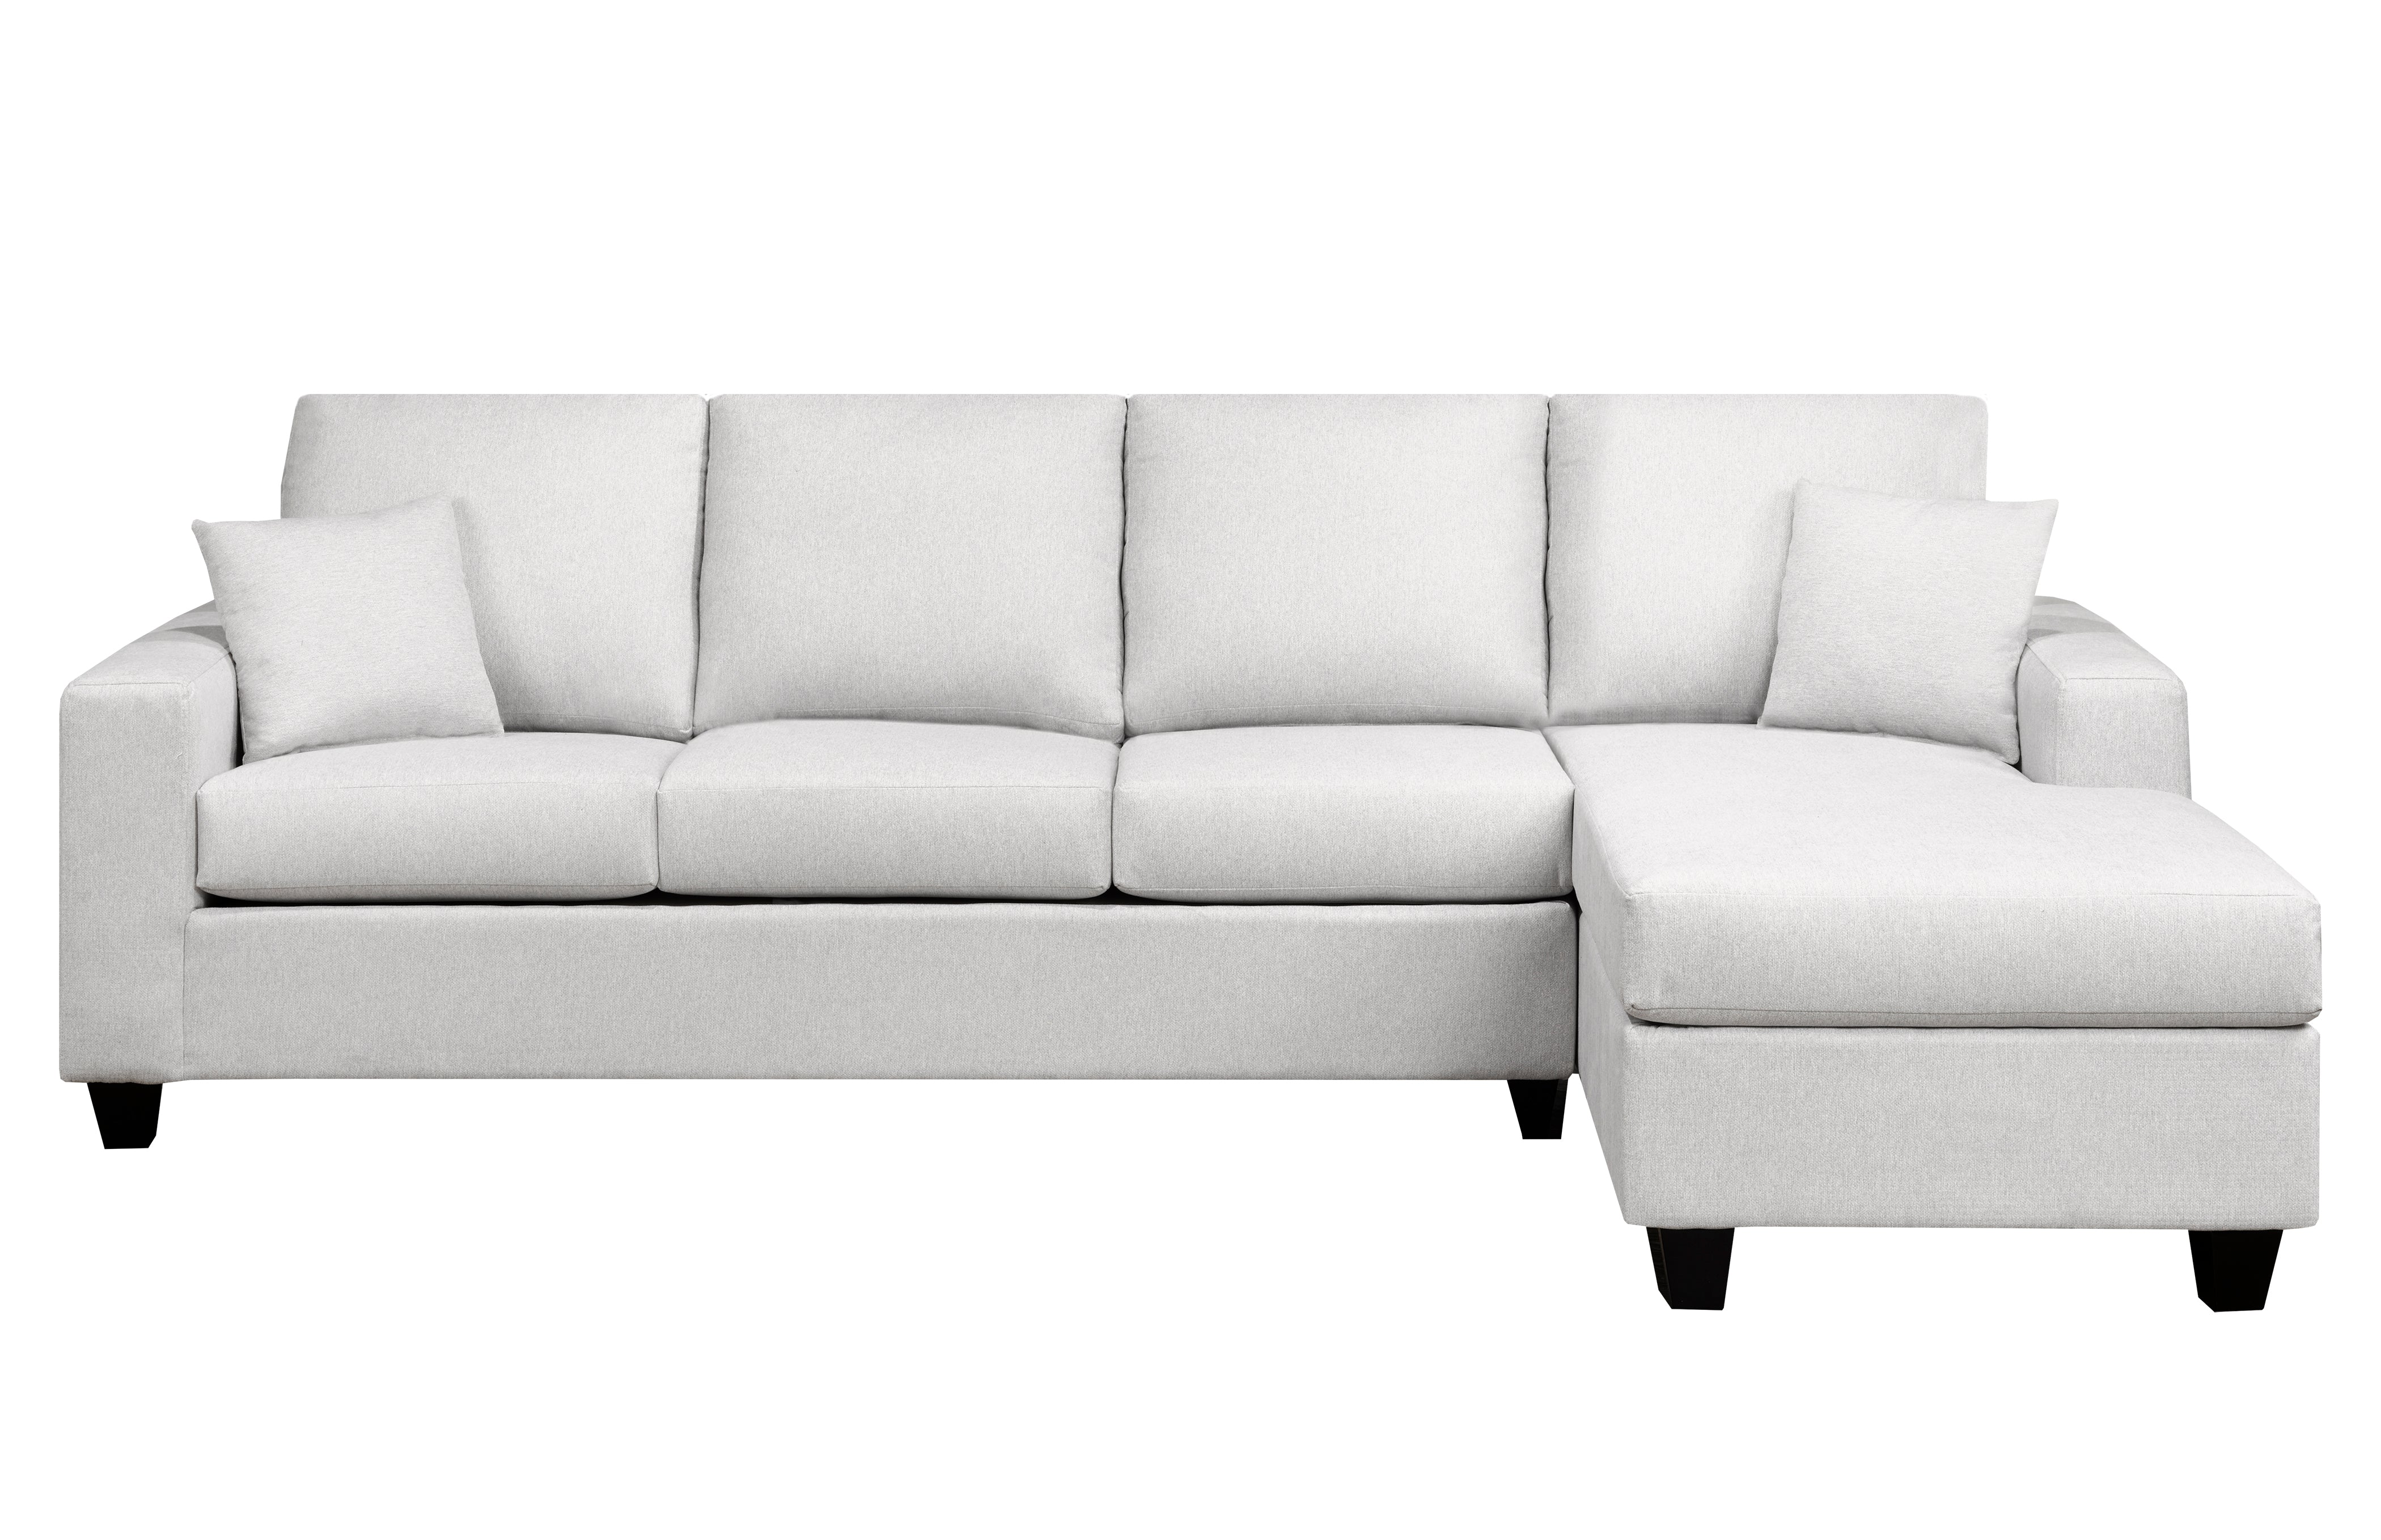 Bolton Sectional - Light Grey (4 Seater)